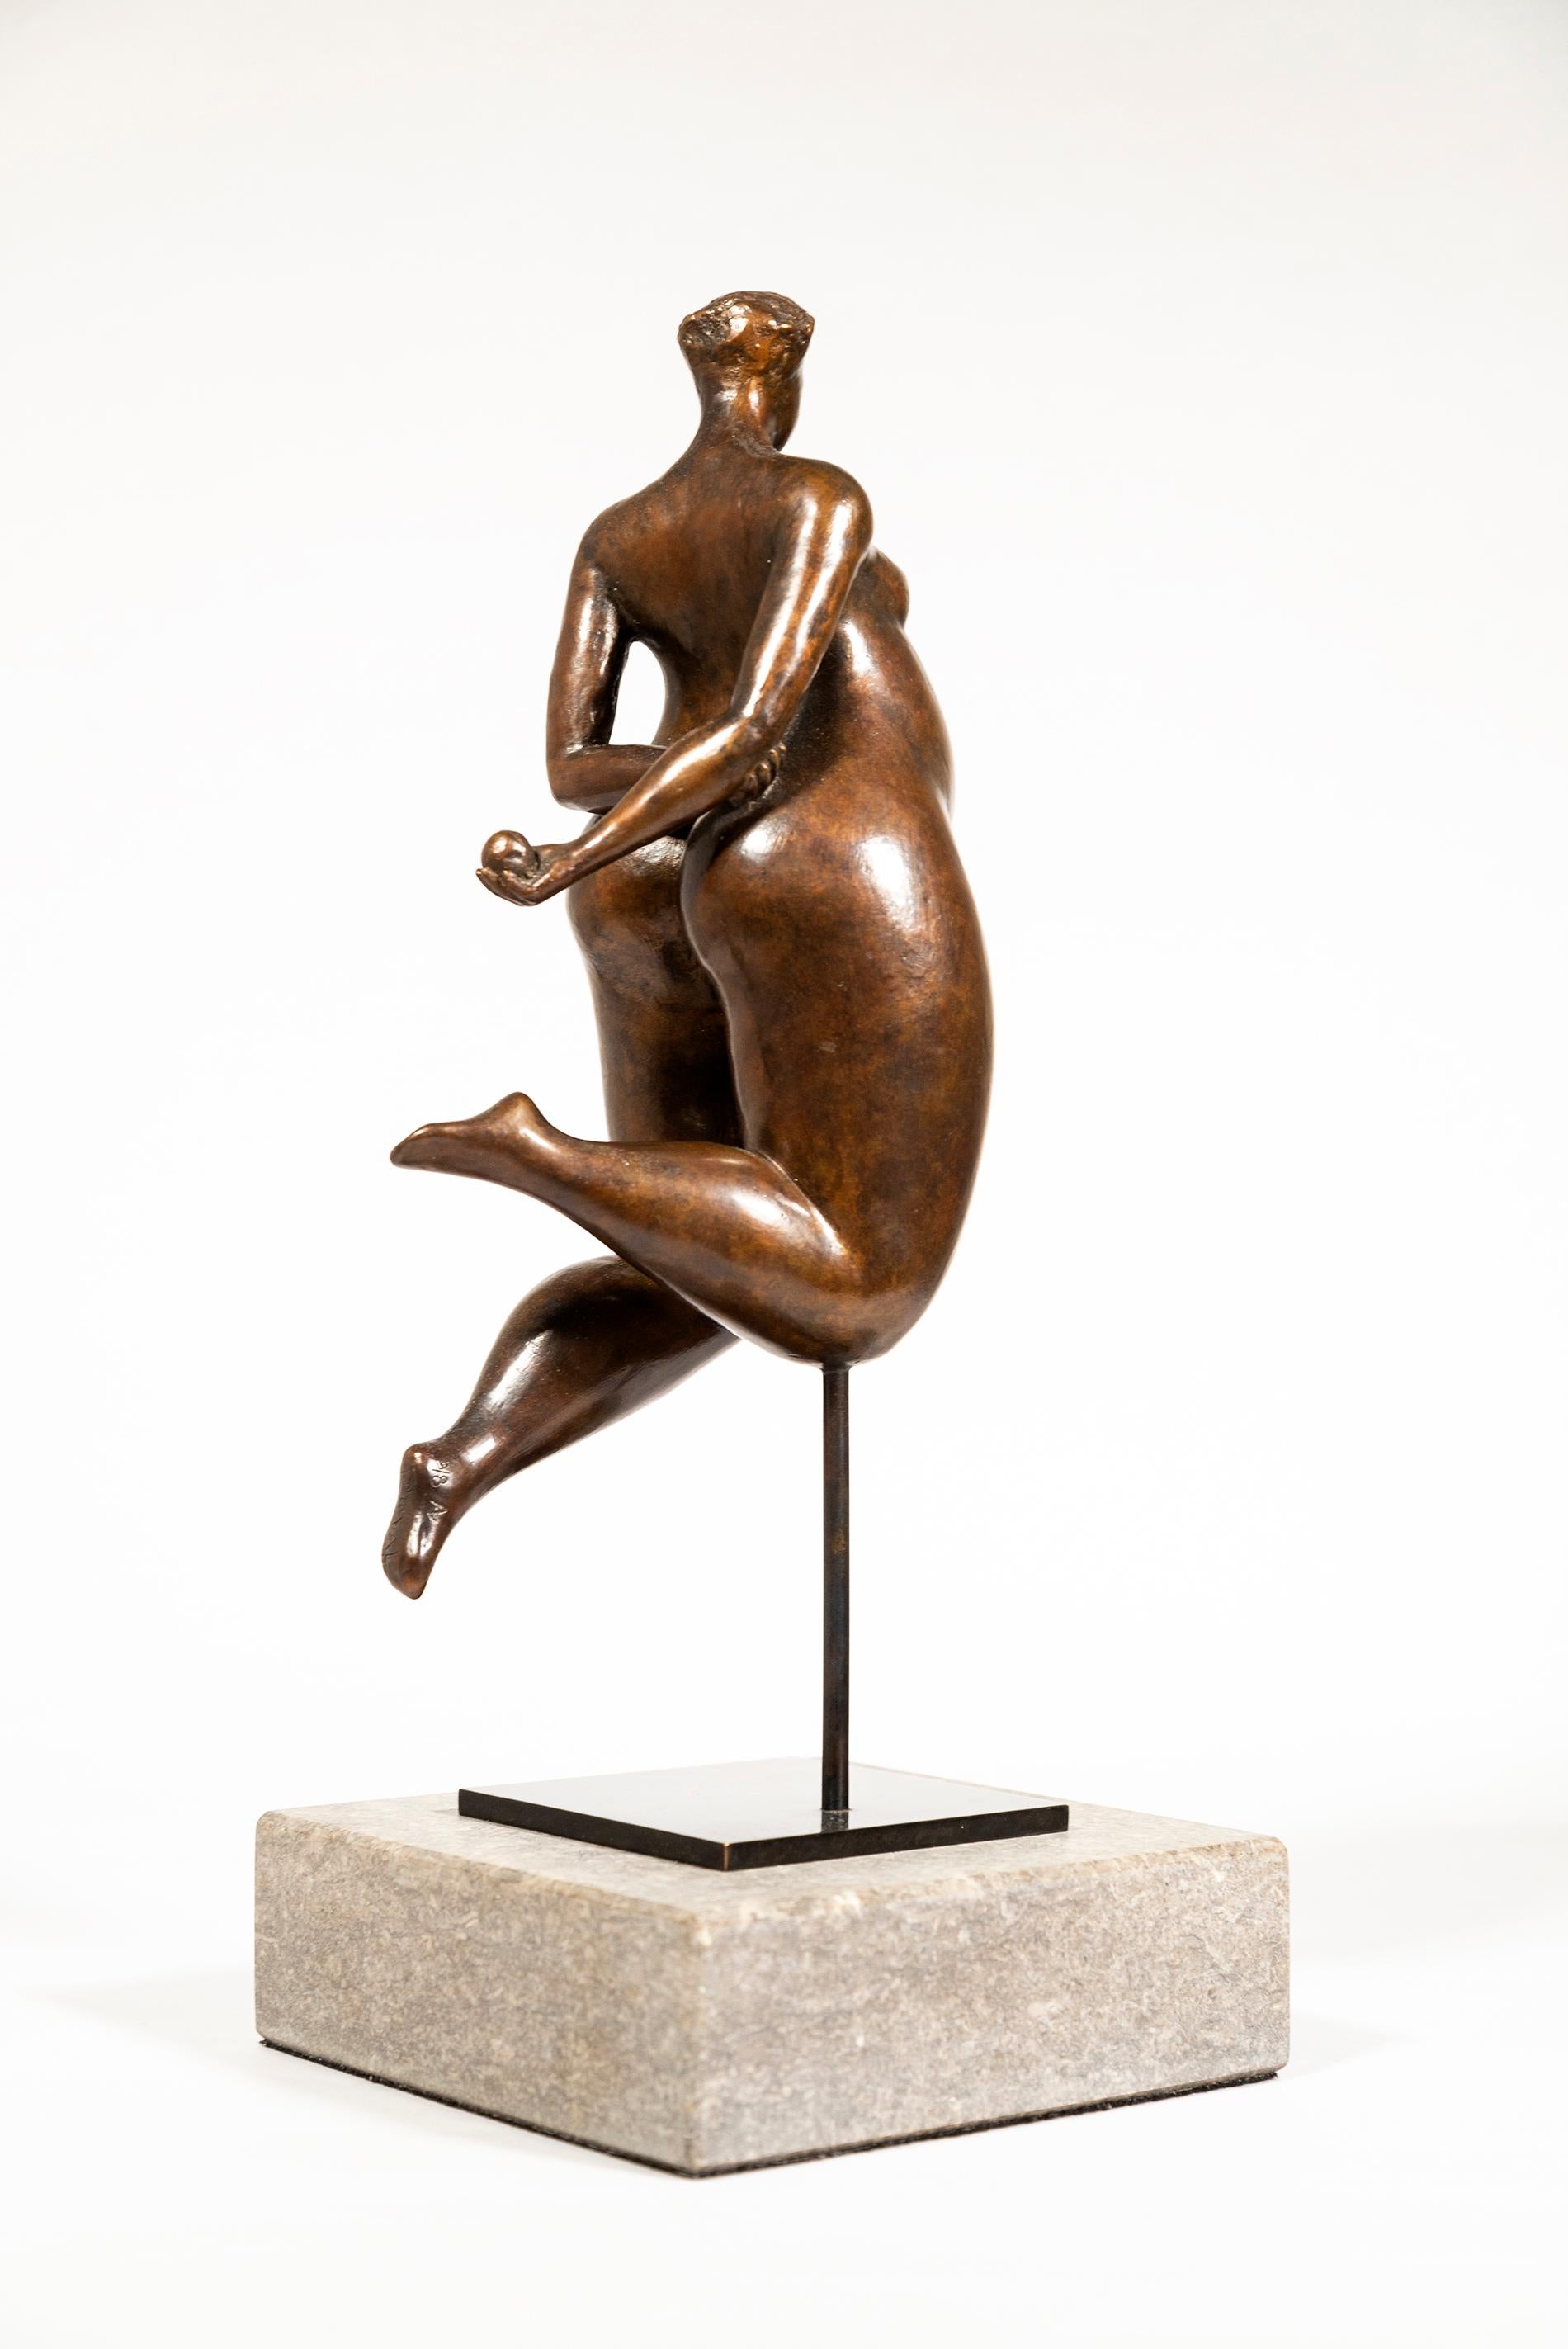 A voluptuous female figure is rendered in this compelling modern tabletop bronze sculpture by Paul Duval. The Quebec artist is best known for creating uniquely expressive figures in a variety of materials.

With this piece, the figure appears head